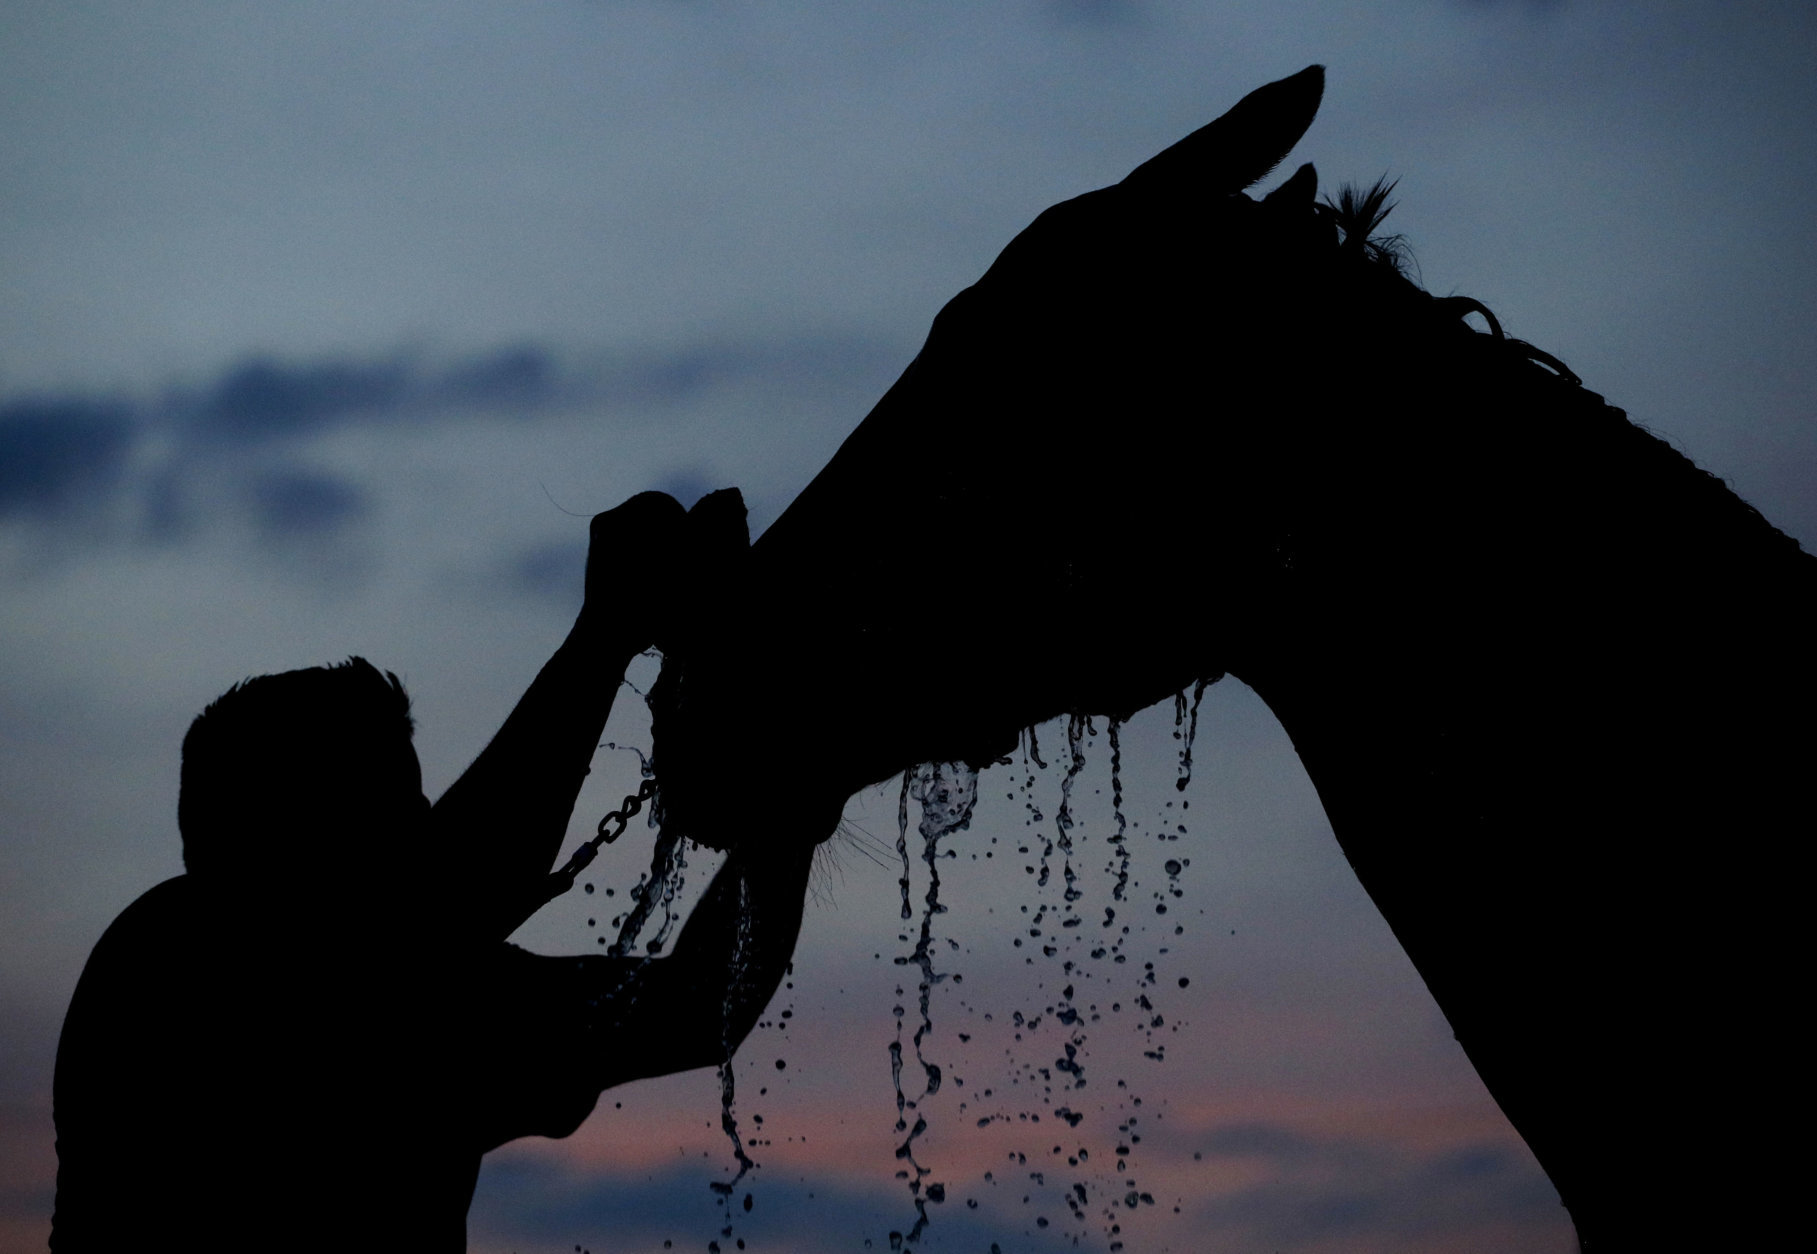 A horse gets a bath after a morning workout at Churchill Downs on Thursday, May 3, 2018, in Louisville, Ky. The 144th running of the Kentucky Derby is scheduled for Saturday, May 5. (AP Photo/Charlie Riedel